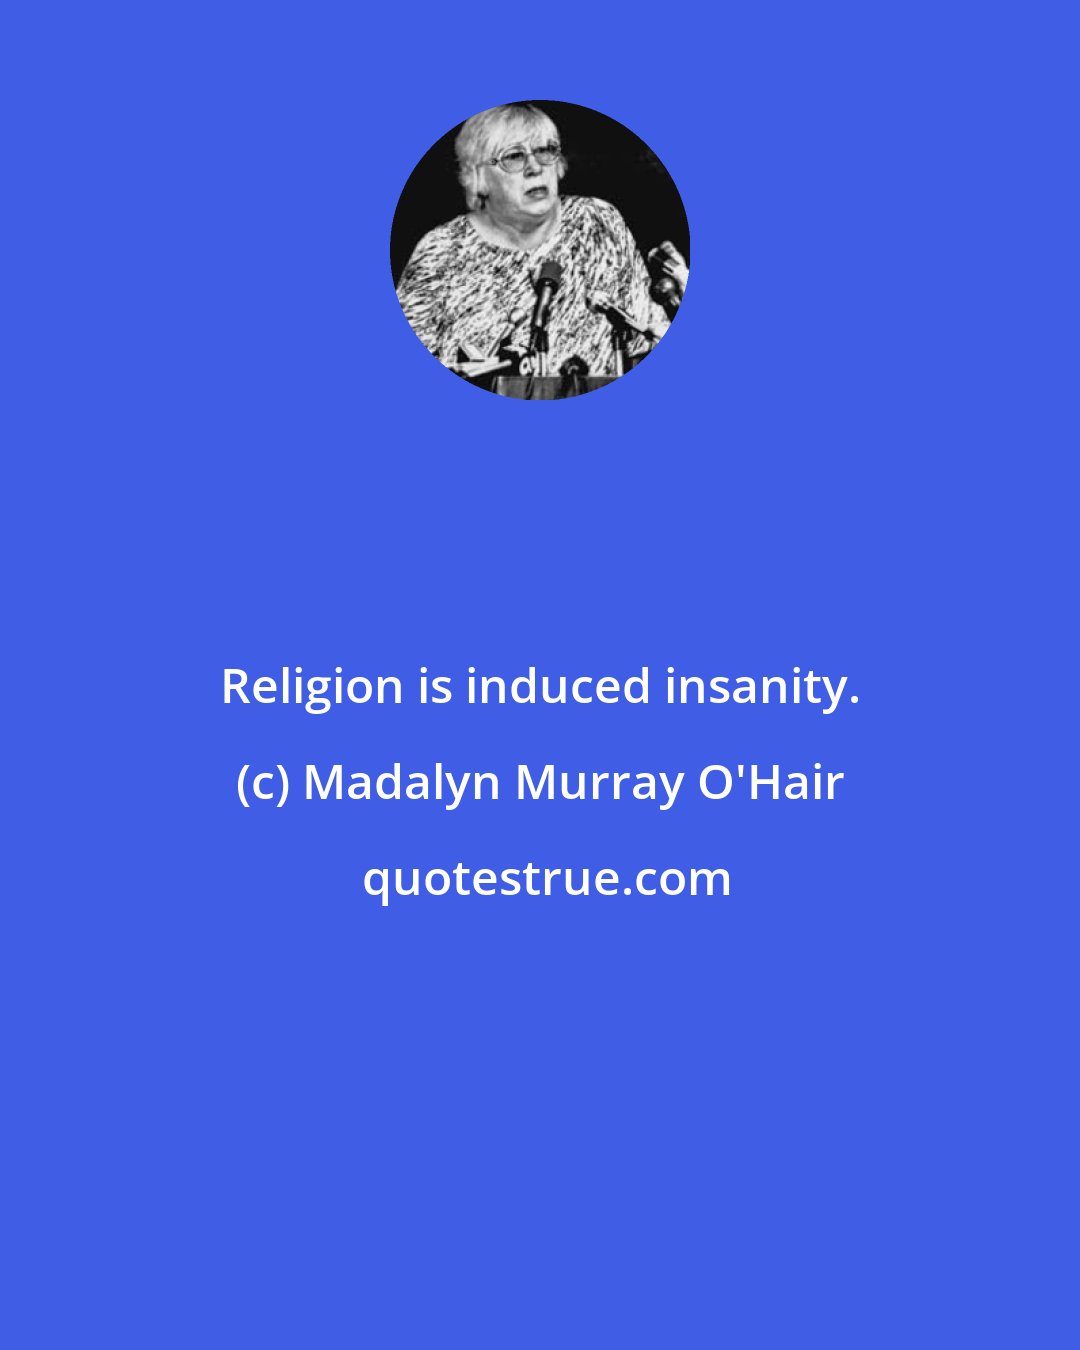 Madalyn Murray O'Hair: Religion is induced insanity.